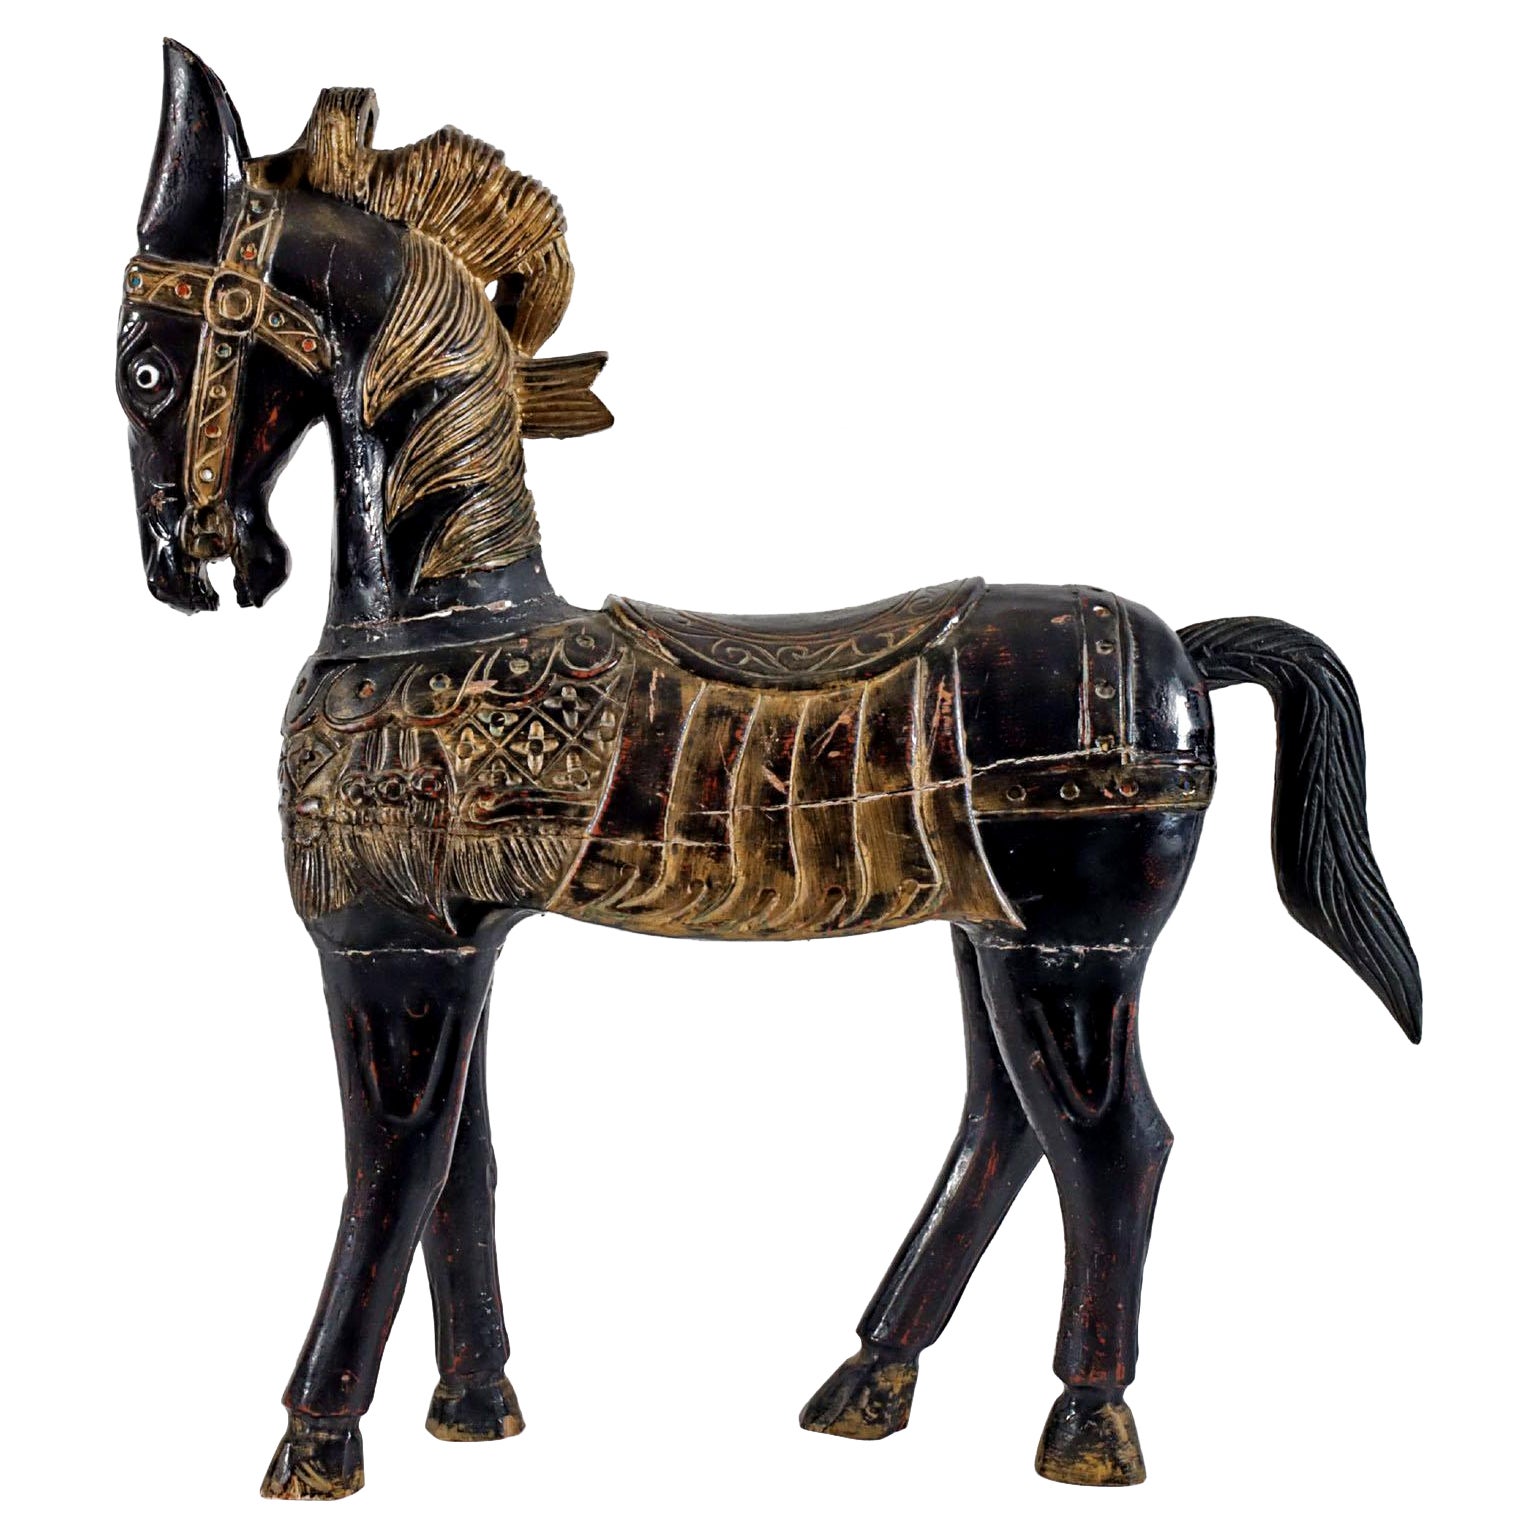 Carved and Painted Wooden Horse